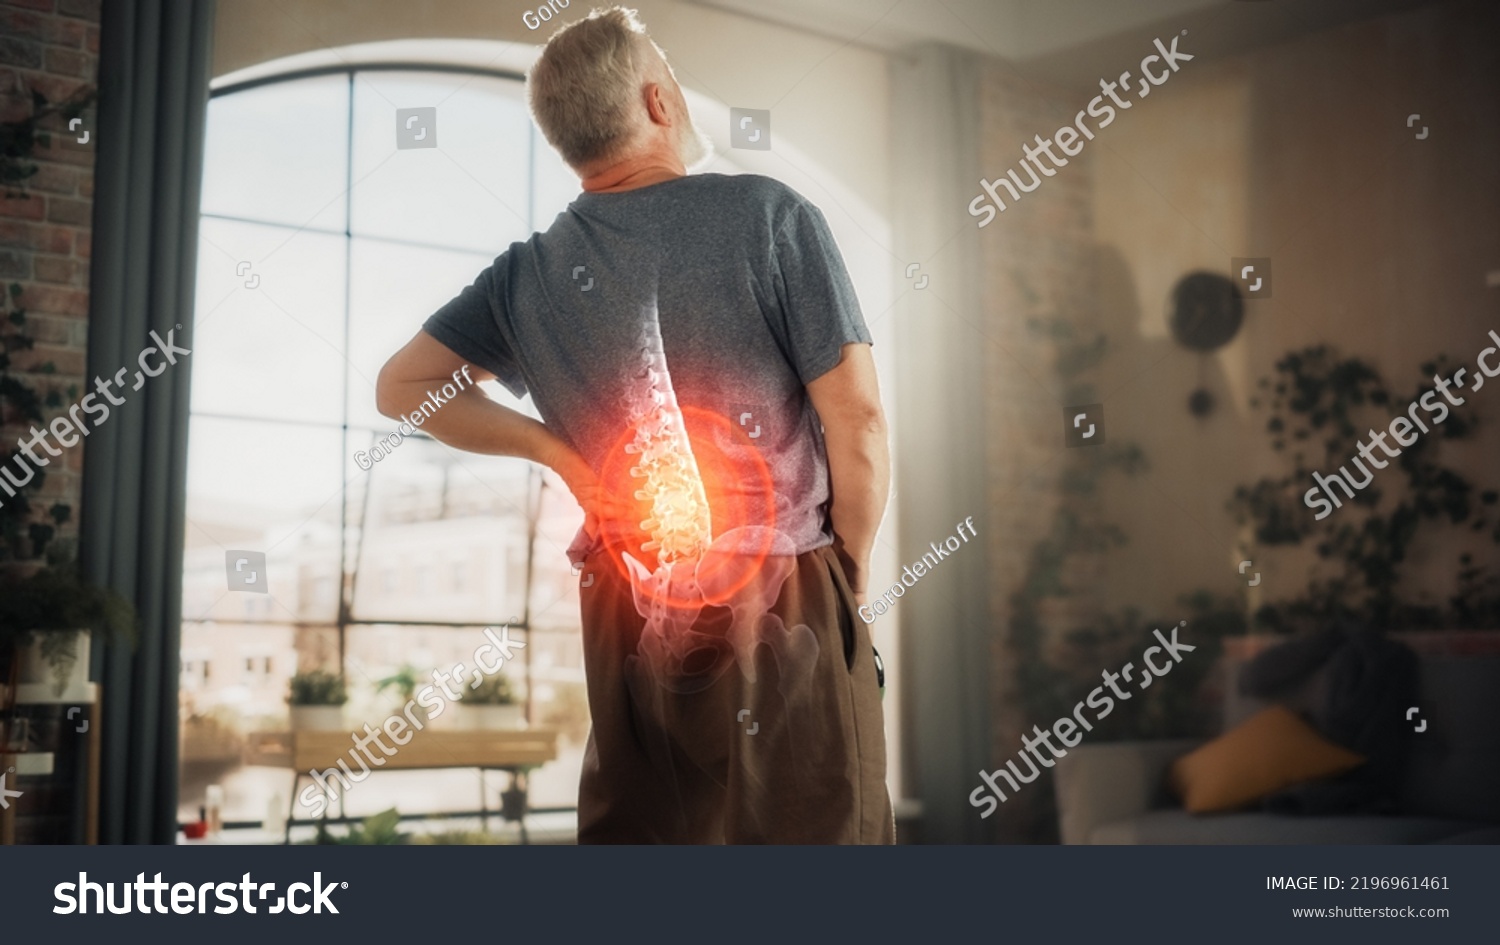 VFX Back Pain Augmented Reality Animation. Close Up of a Senior Male Experiencing Discomfort in a Result of Spine Trauma or Arthritis. Man Massaging and Stretching the Back to Ease the Injury. #2196961461